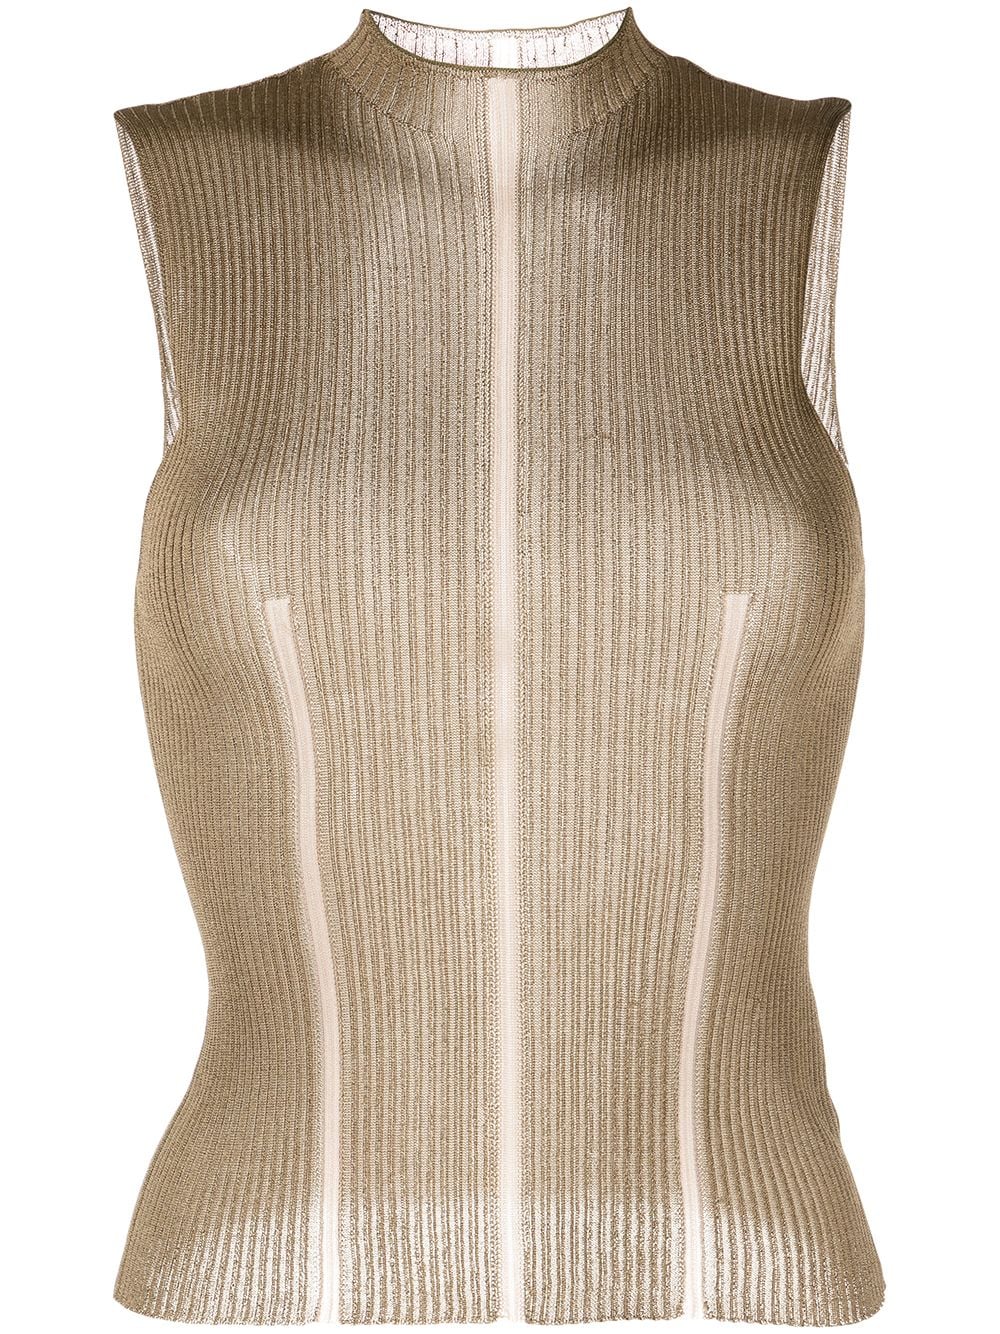 Dion Lee Cut out-detail Knitted Top - Farfetch